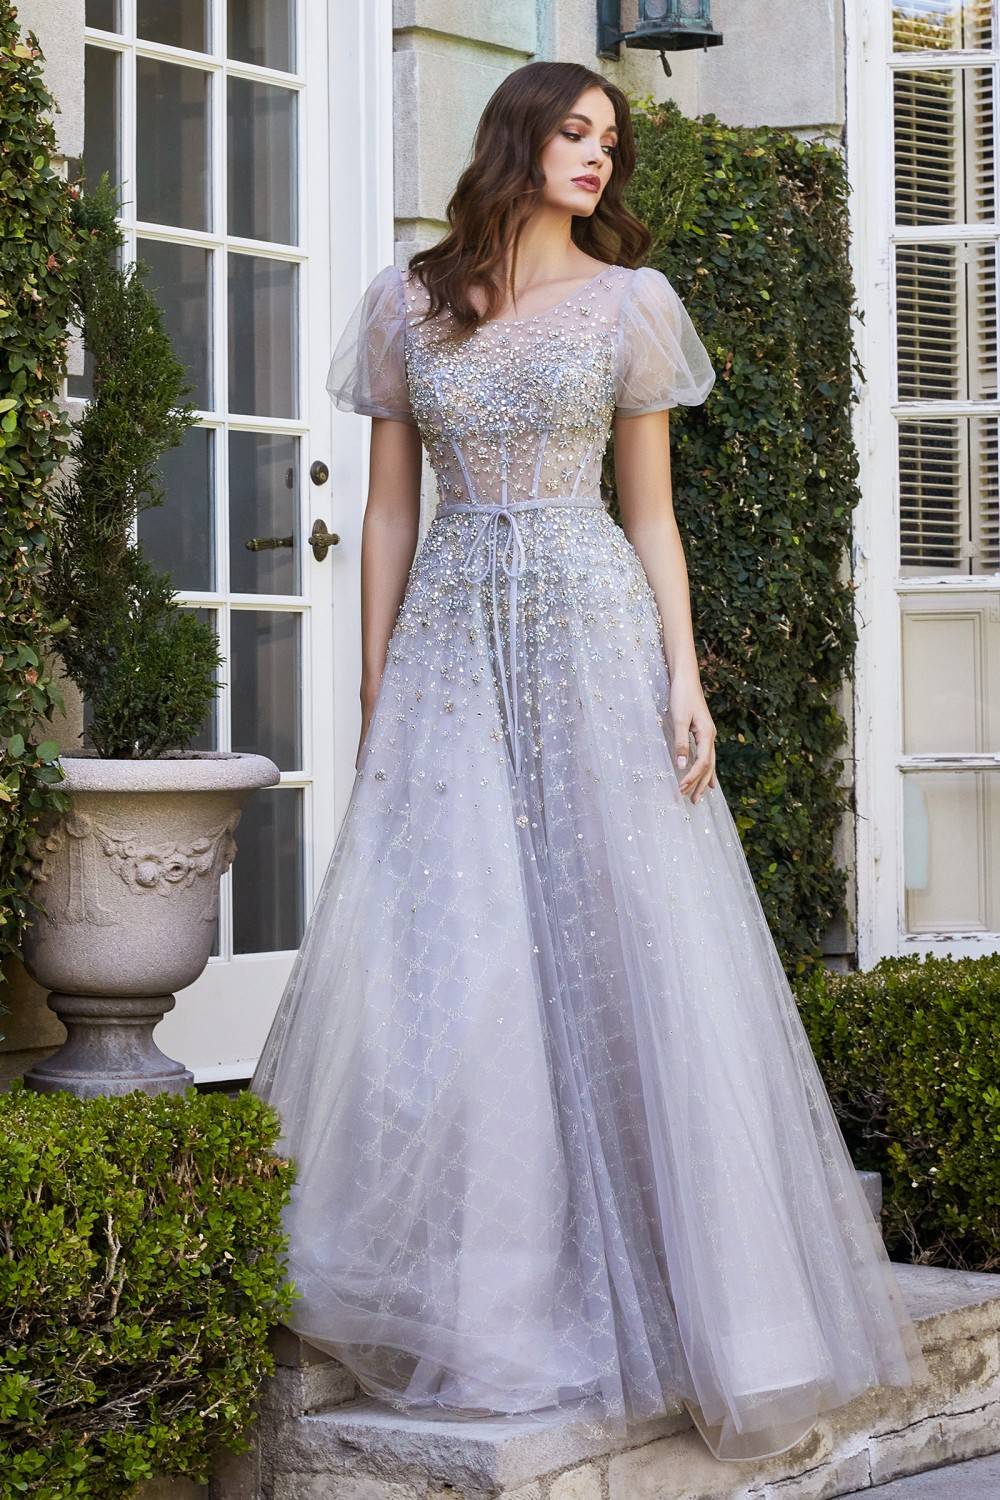 silver puff sleeves ball gown in multi-colored glass beads and sheer layered tulle